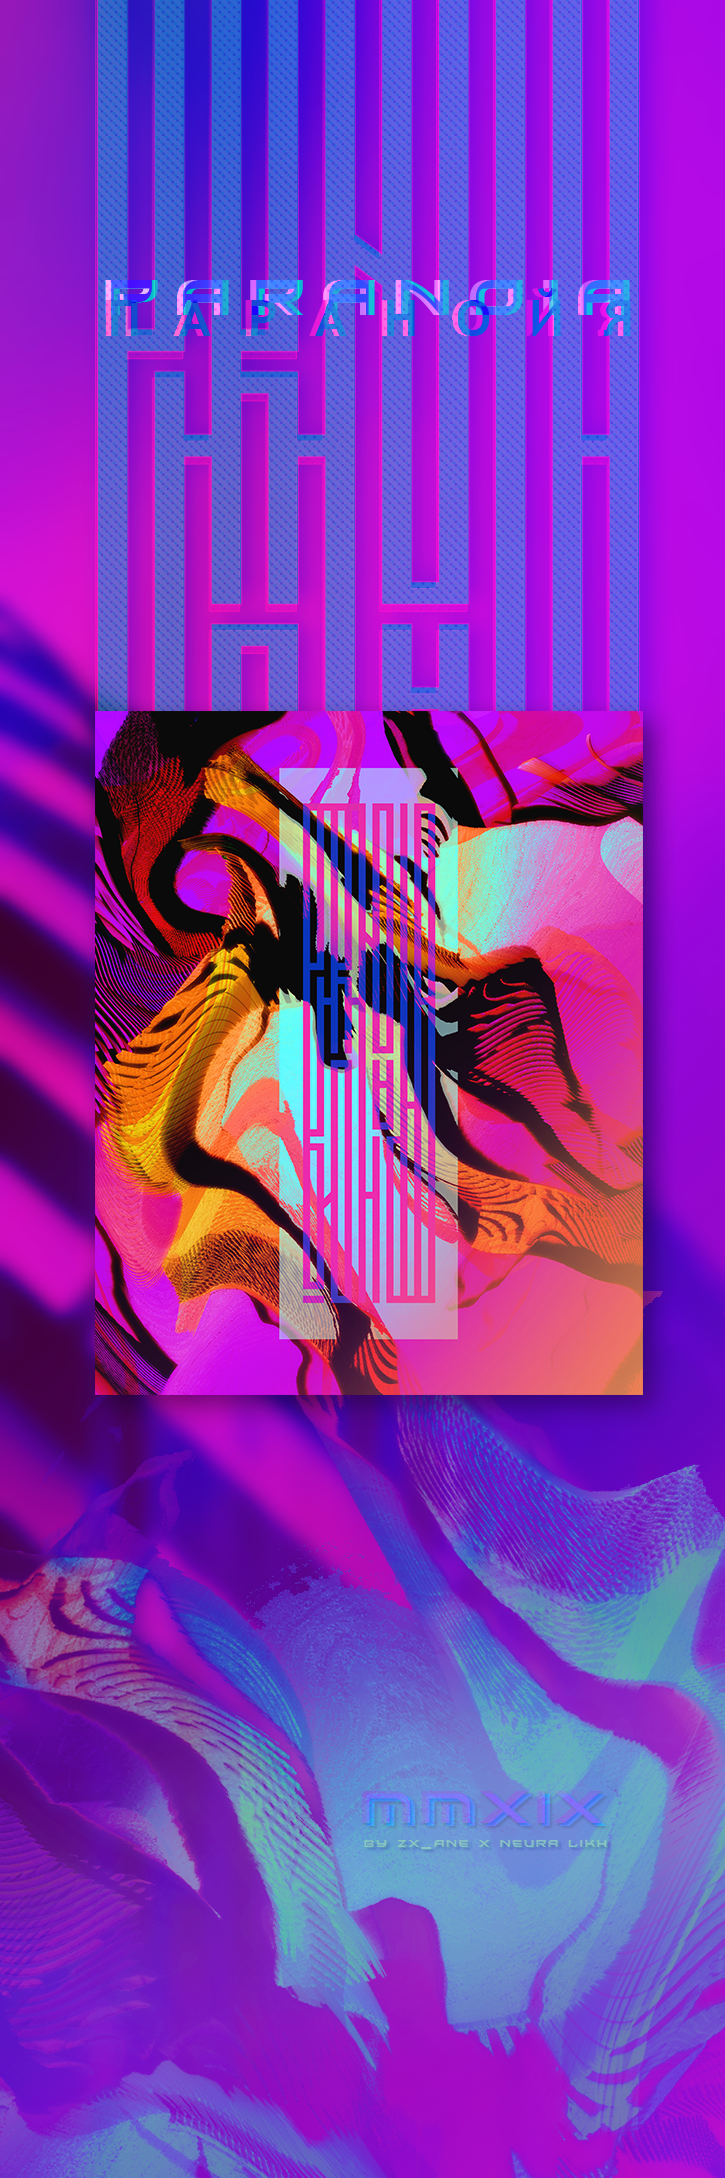 Calligraphy   lettering calligraffity typo vaporwave abstraction 3D texture holographic print